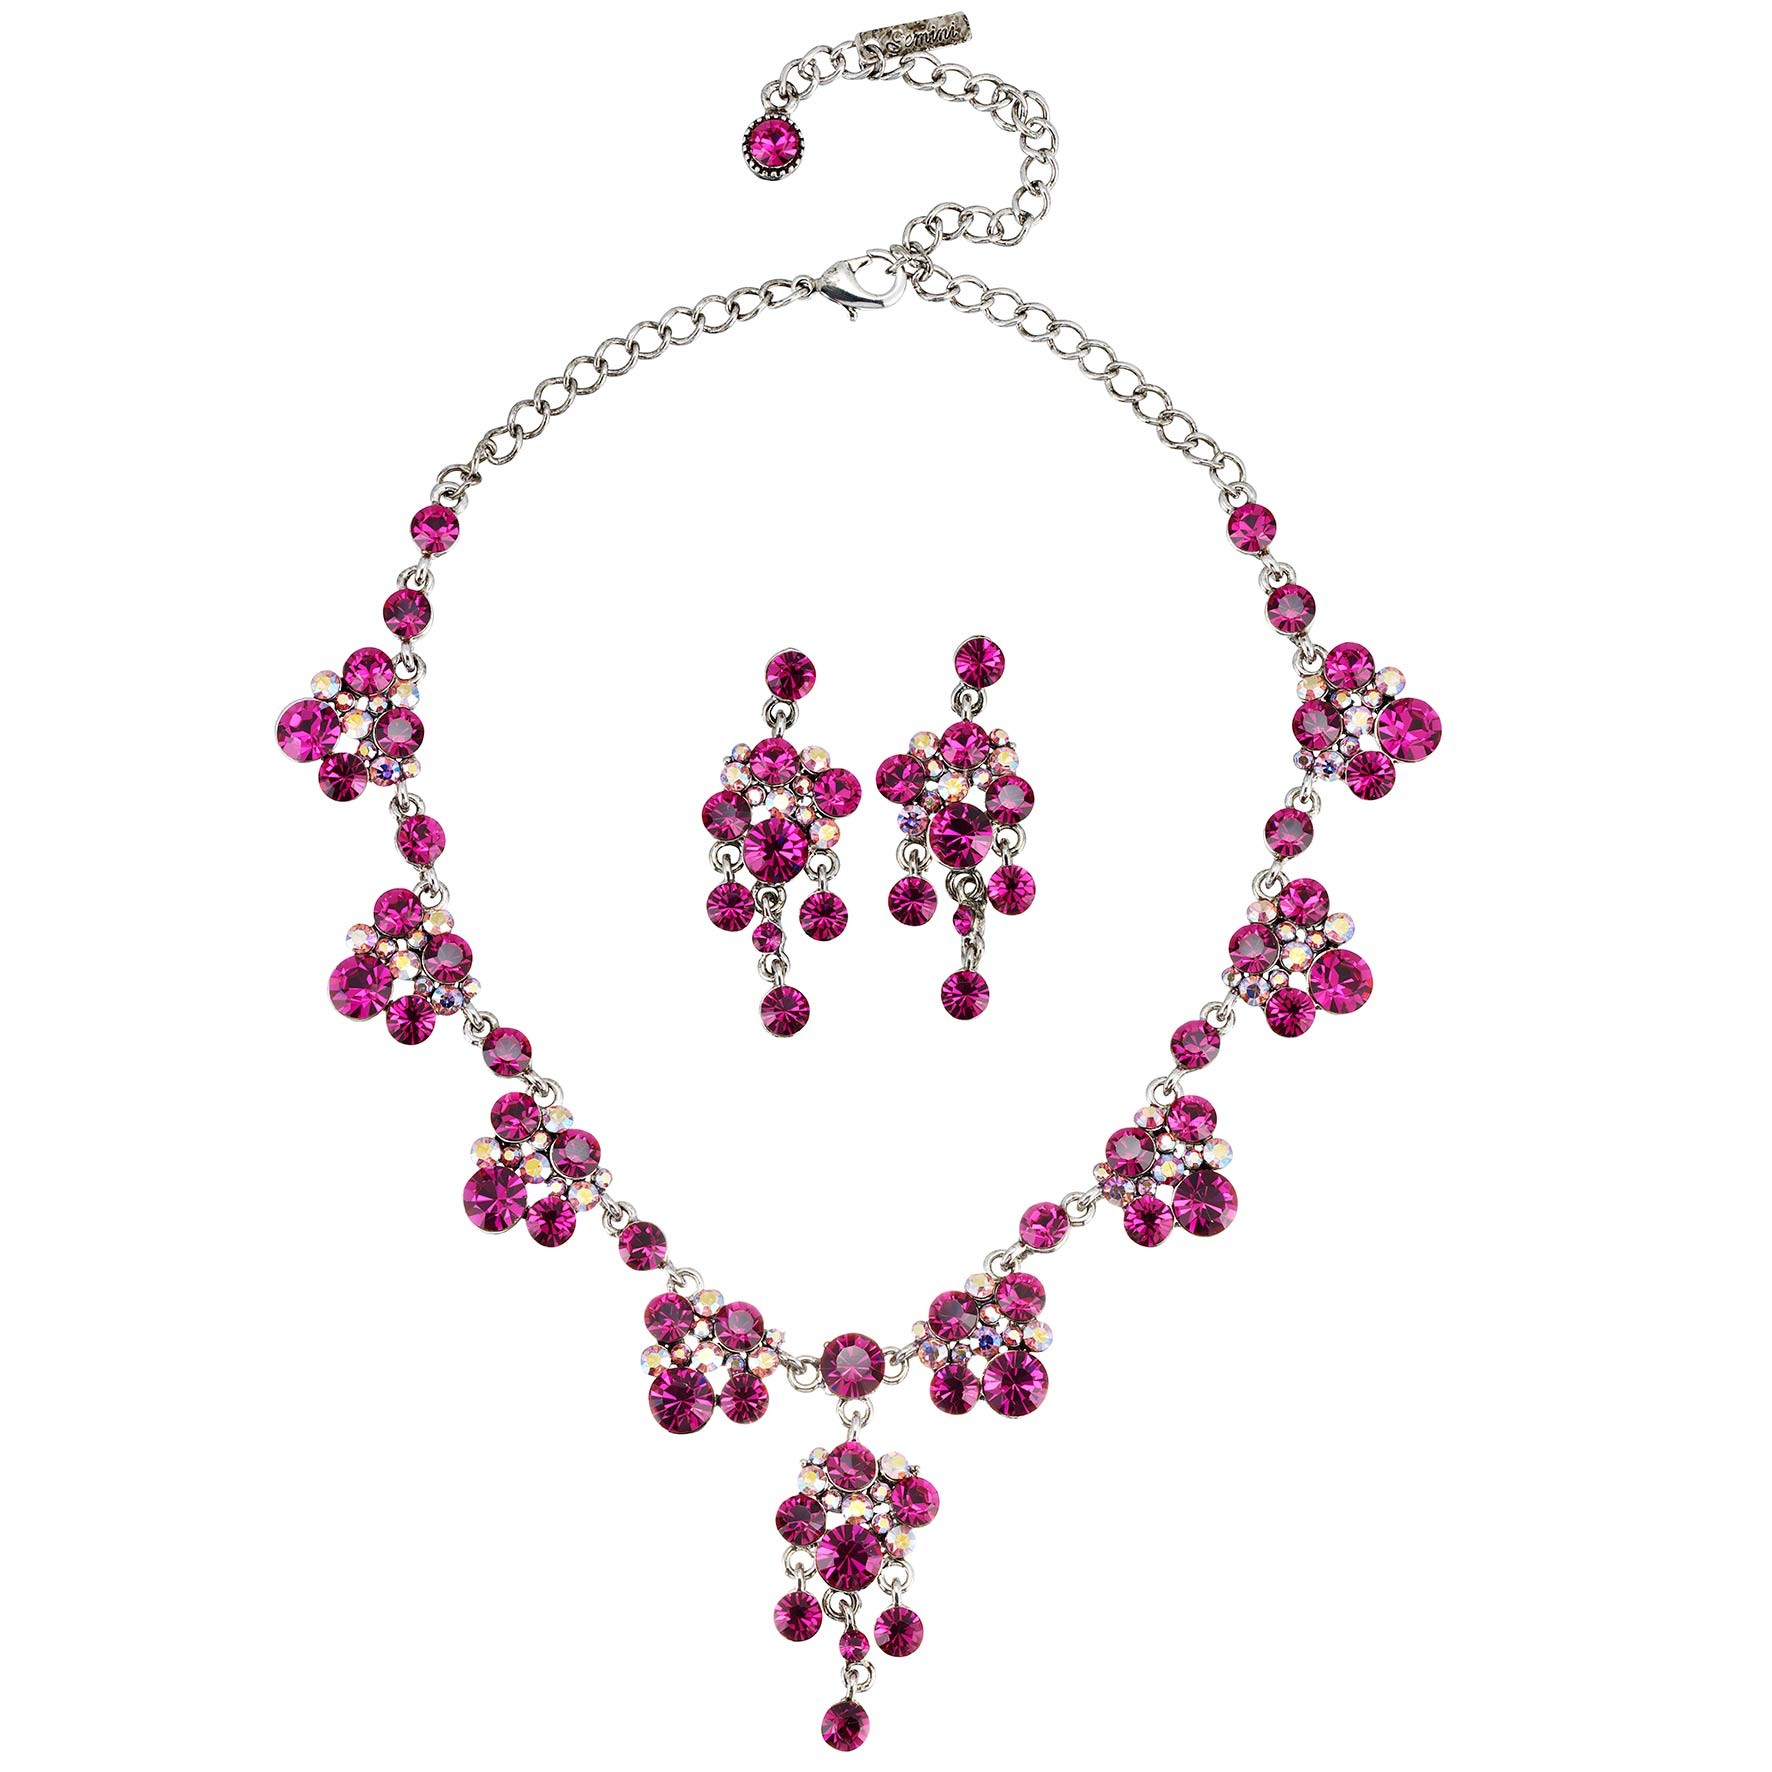 oferta vino Partina City Swarovski Crystal Pink Crystal Necklace and Earrings Set, Chandelier Drop,  Fuchsia and Fuchsia AB Swarovski Crystals Necklaces, Earrings, Bracelets  and Hairpieces